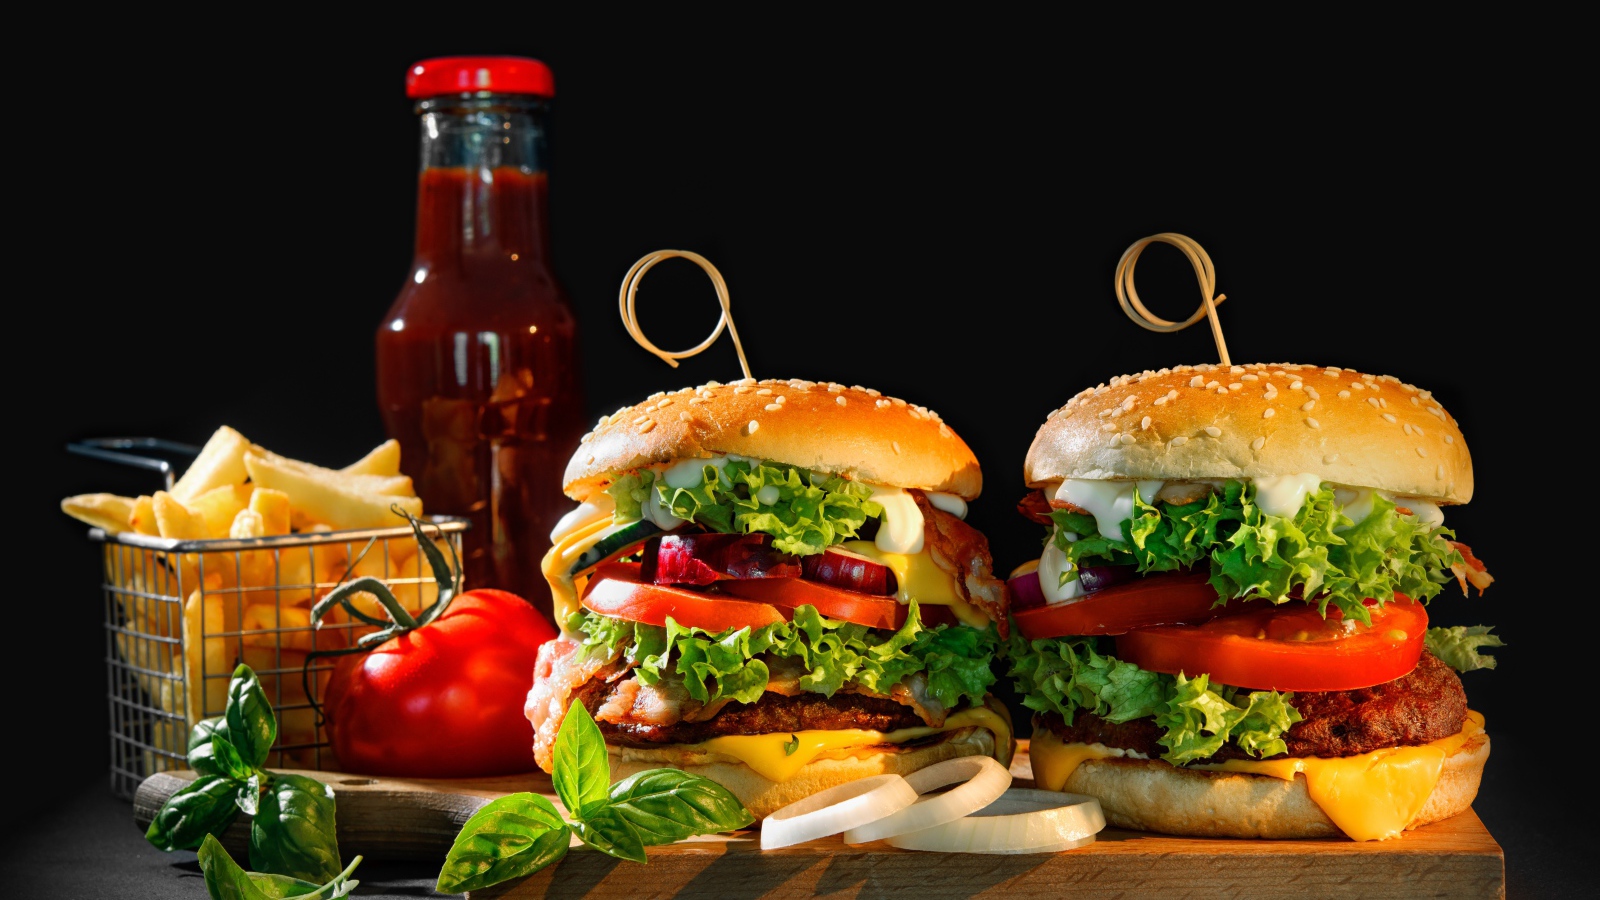 Hamburgers on the table with potatoes and ketchup on a black background